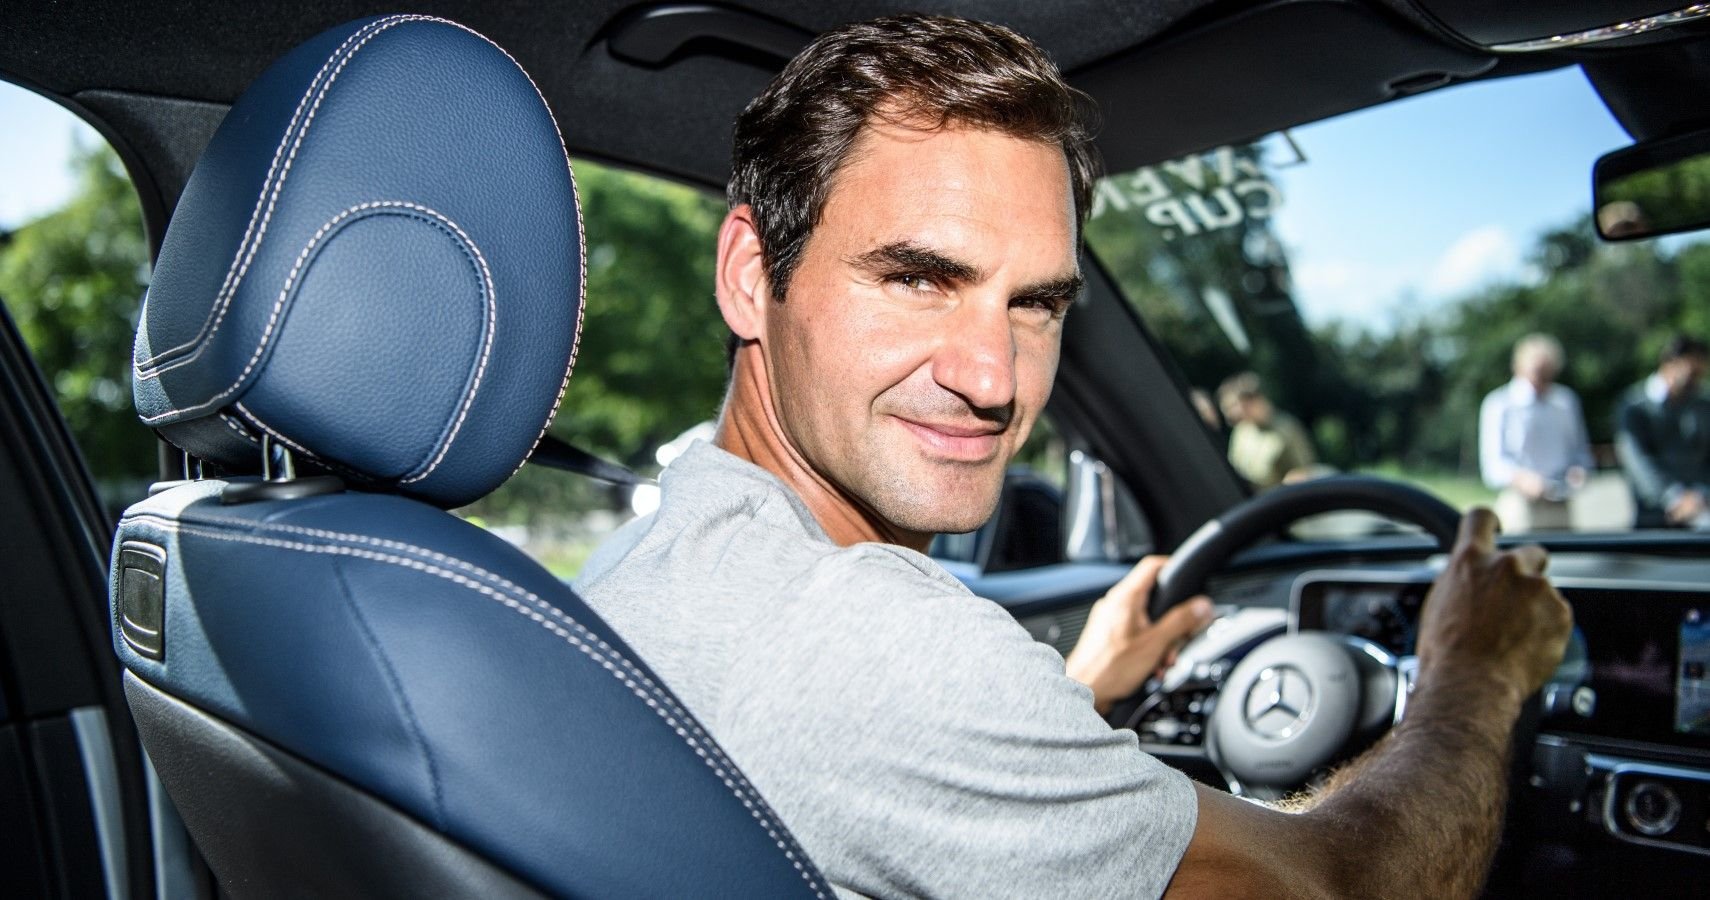 Roger Federer's Car Collection Is Dominated By Desirable German Cars